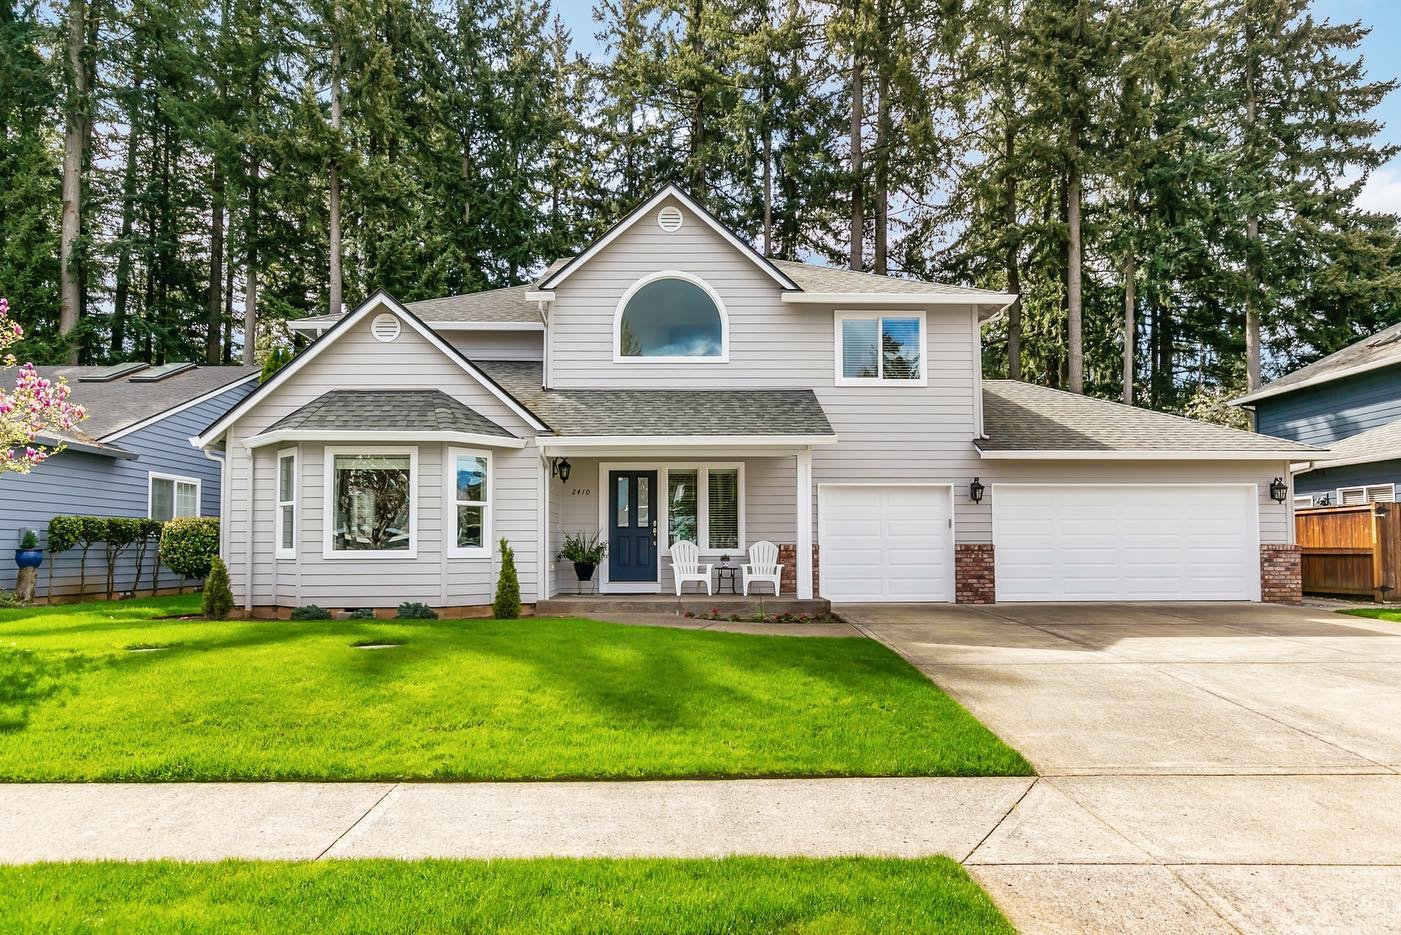 Another well maintained home in Camas, WA about to hit the market. 

Been seeing many homes in Camas lately that receive multiple offers within days of going live for over asking price. Even with interest rates where they are, the market is still str